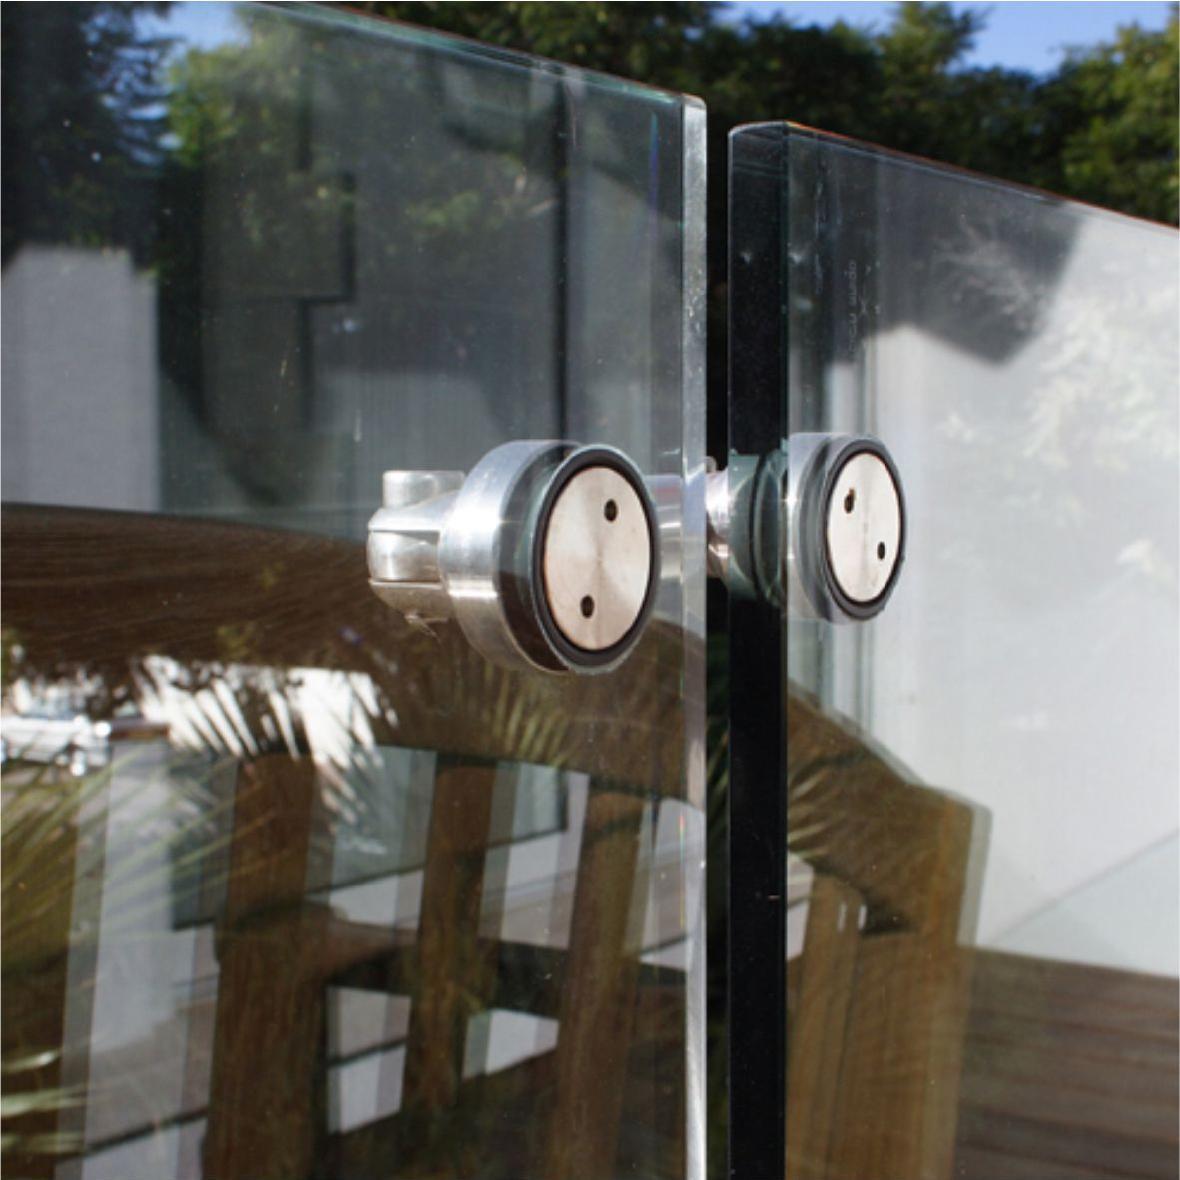 Common frameless glass fitting and their installation methods